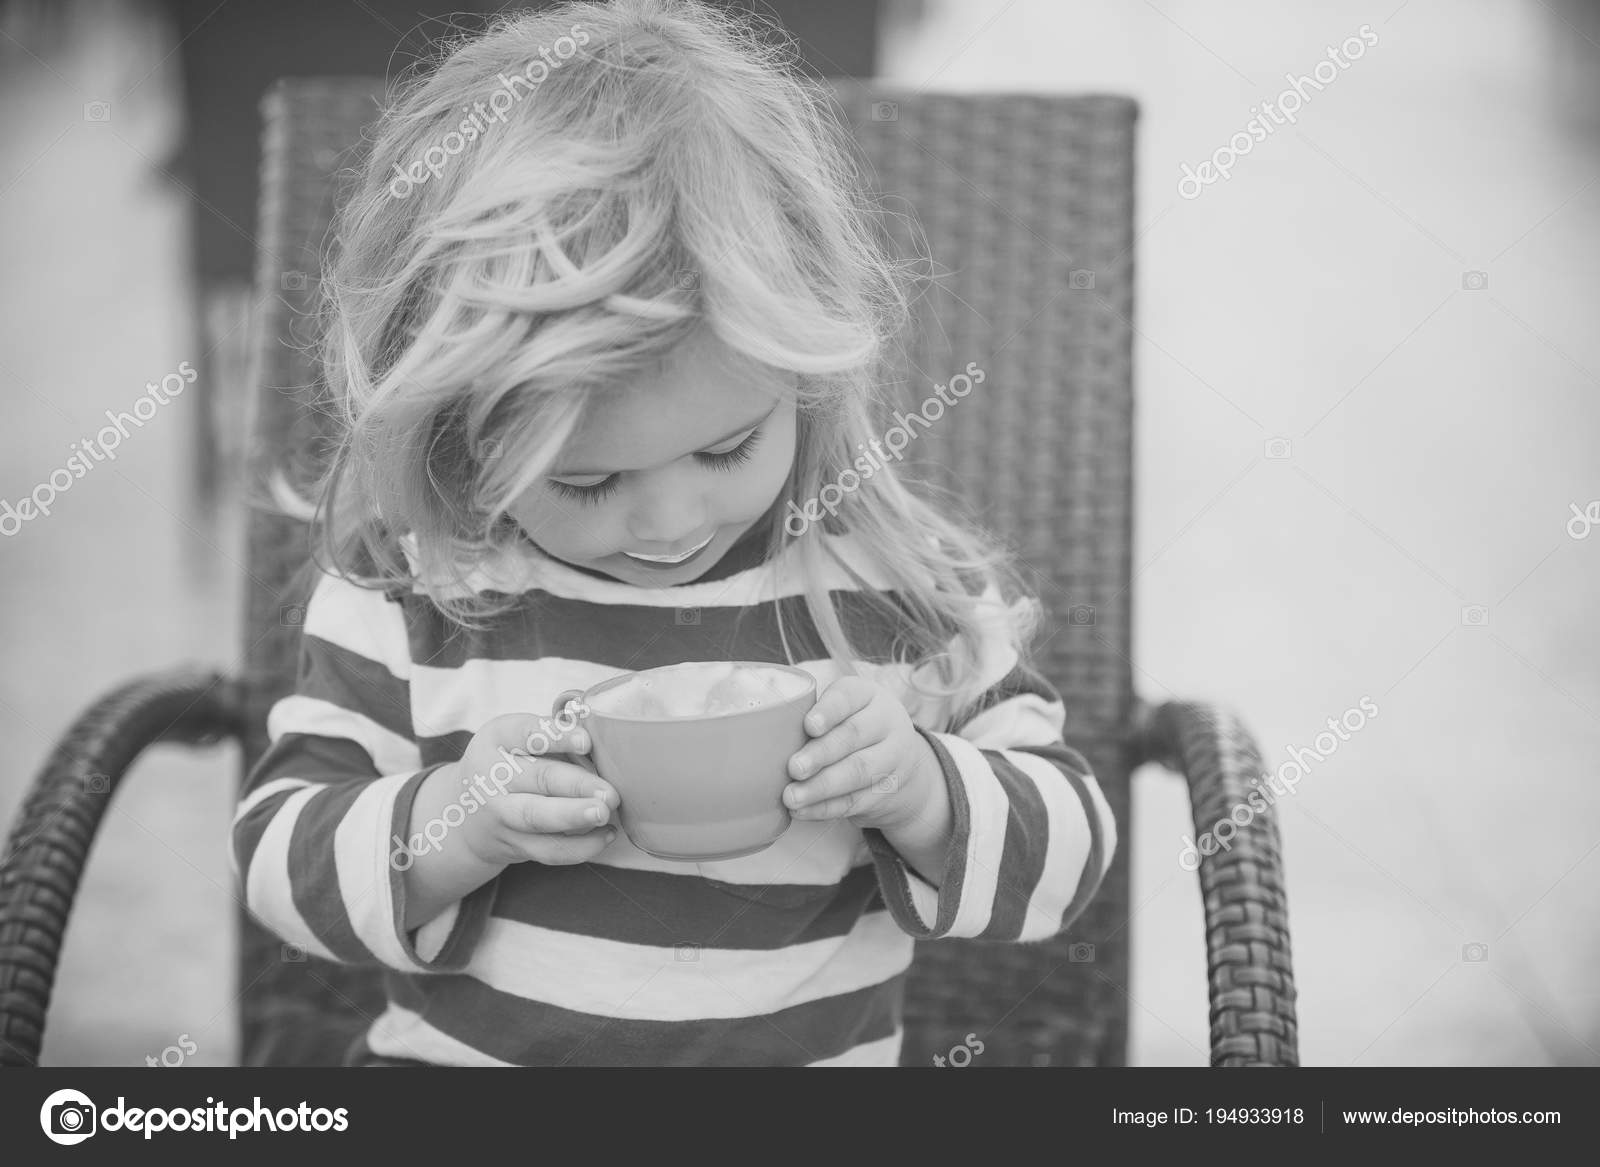 Boy drinking milk on chair Stock Photo by © 194933918